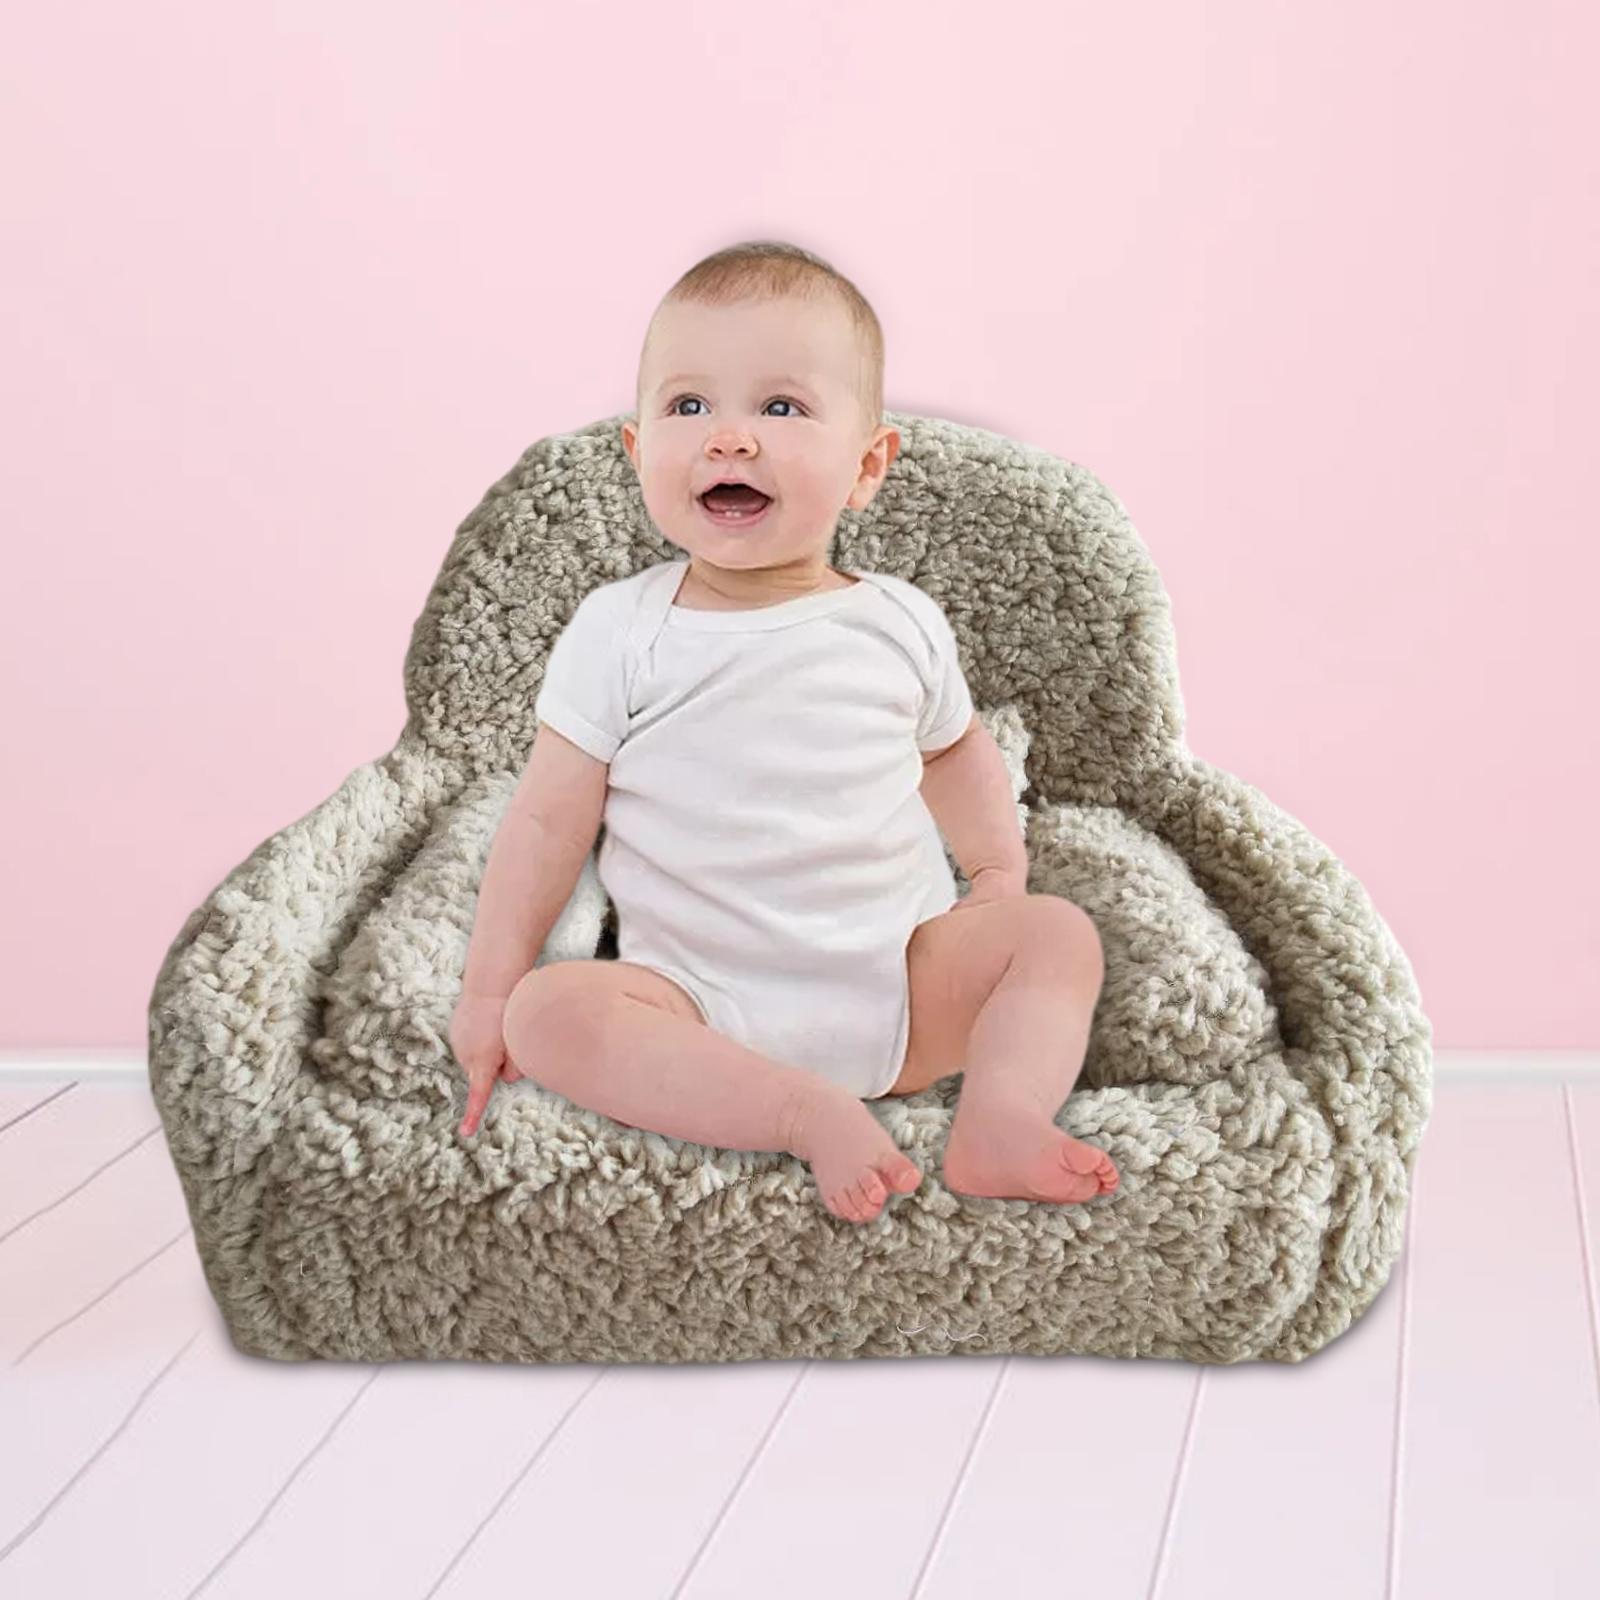 Baby Photo Props Baby Posing Sofa Pillow Photography Props Baby Photo Modeling for Infant Toddler